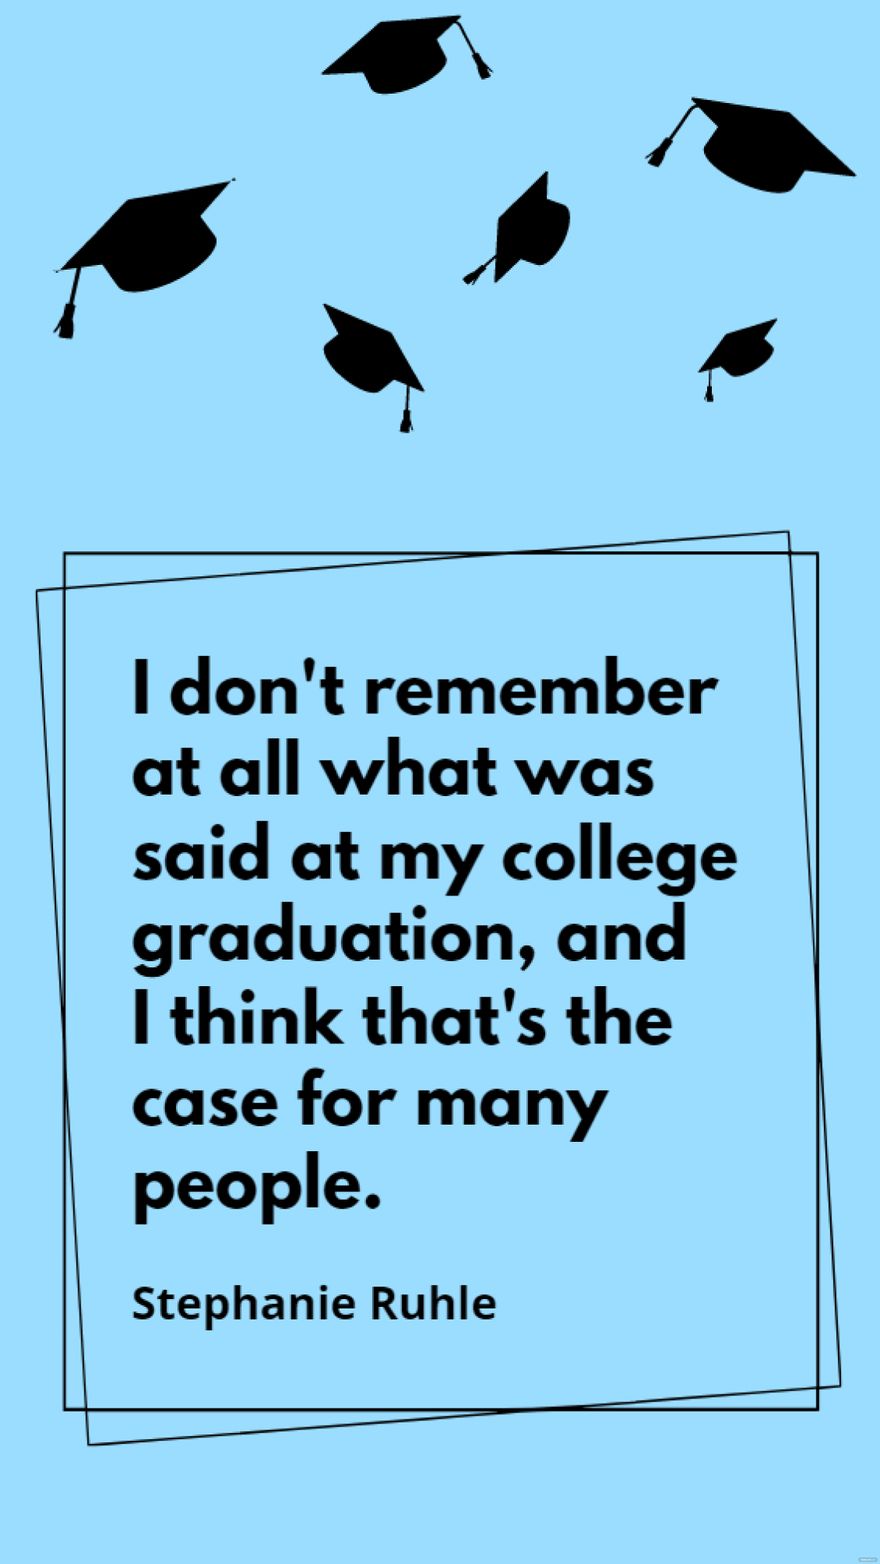 Stephanie Ruhle - I don't remember at all what was said at my college graduation, and I think that's the case for many people.